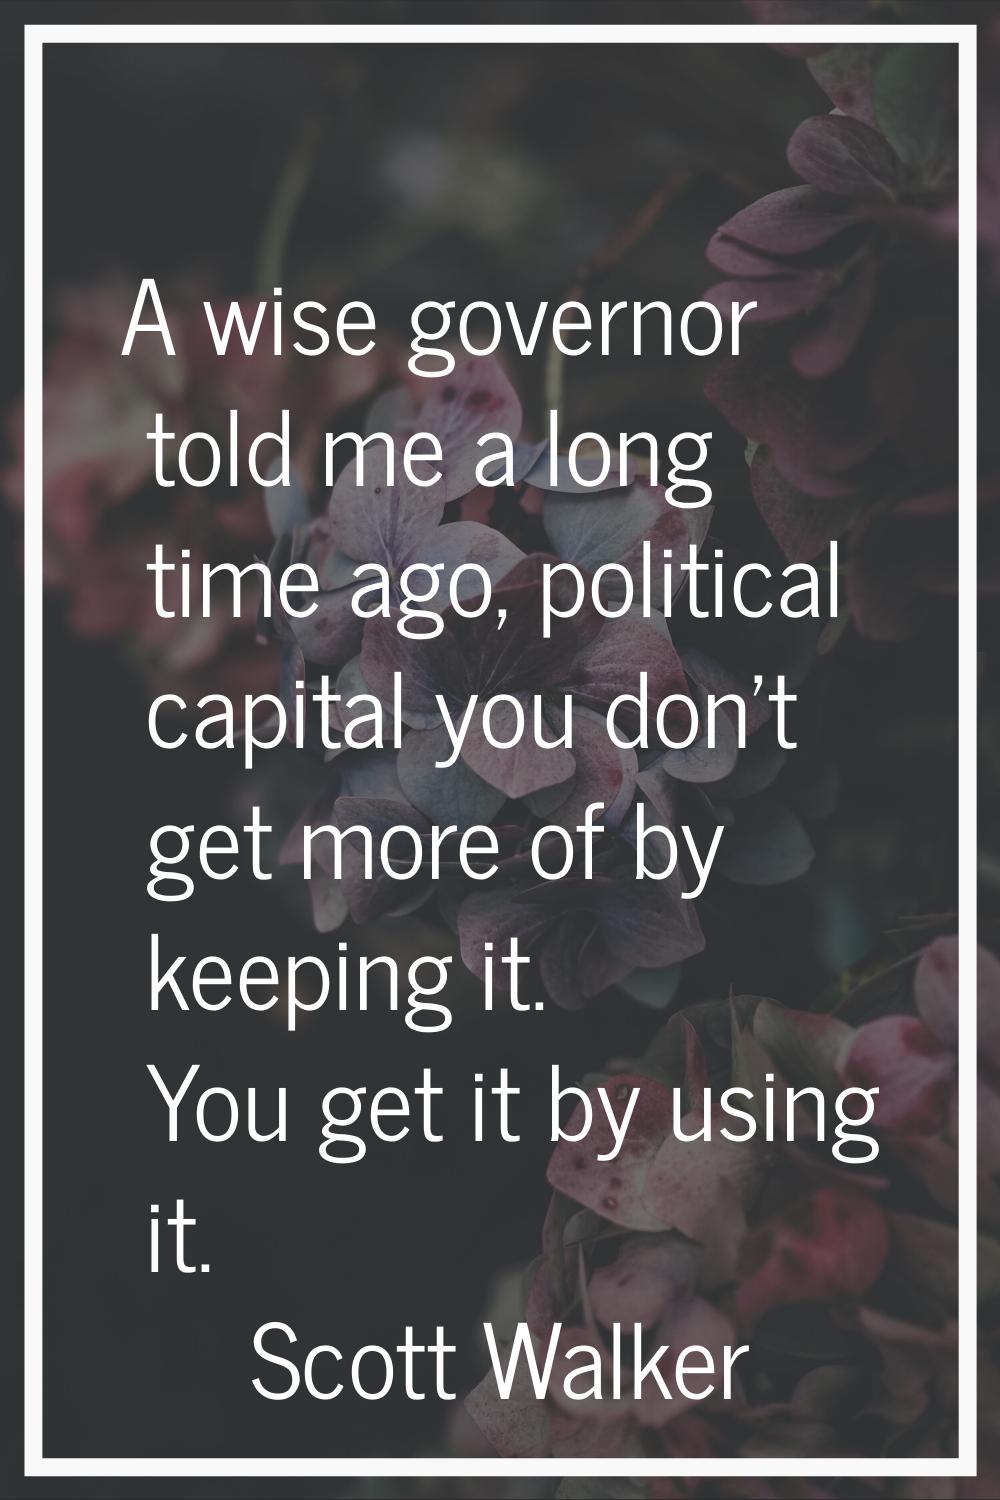 A wise governor told me a long time ago, political capital you don't get more of by keeping it. You